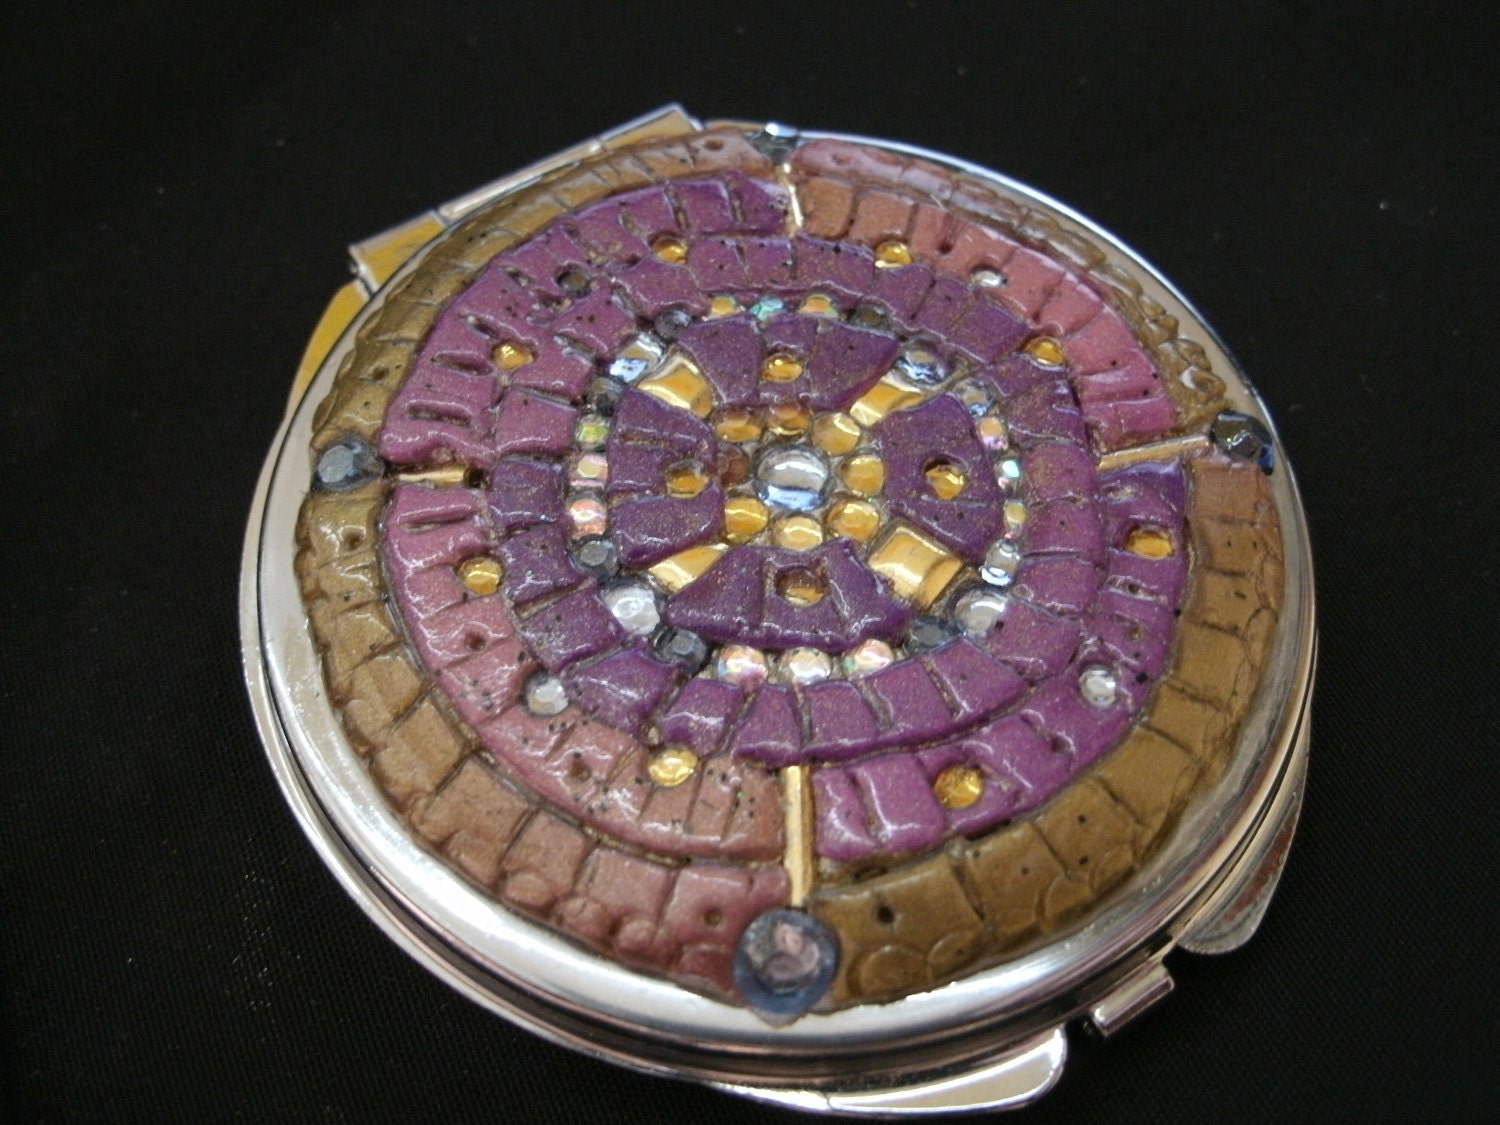 Purple and Gold Mosiac Compact Mirror with Rhinestone and Bead Accents - Beautiful